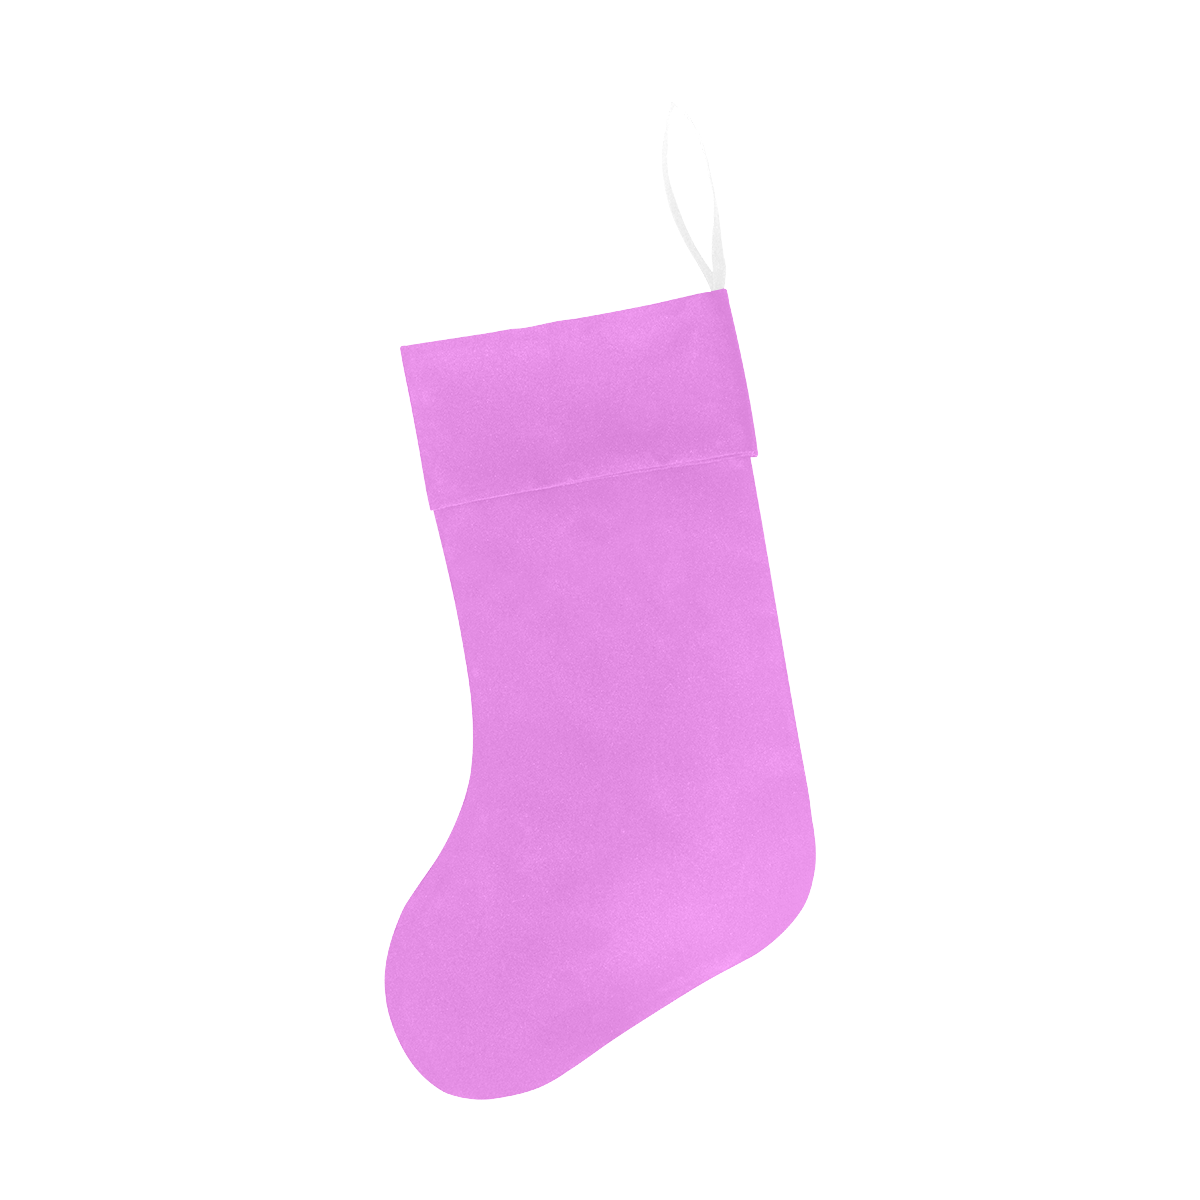 color violet Christmas Stocking